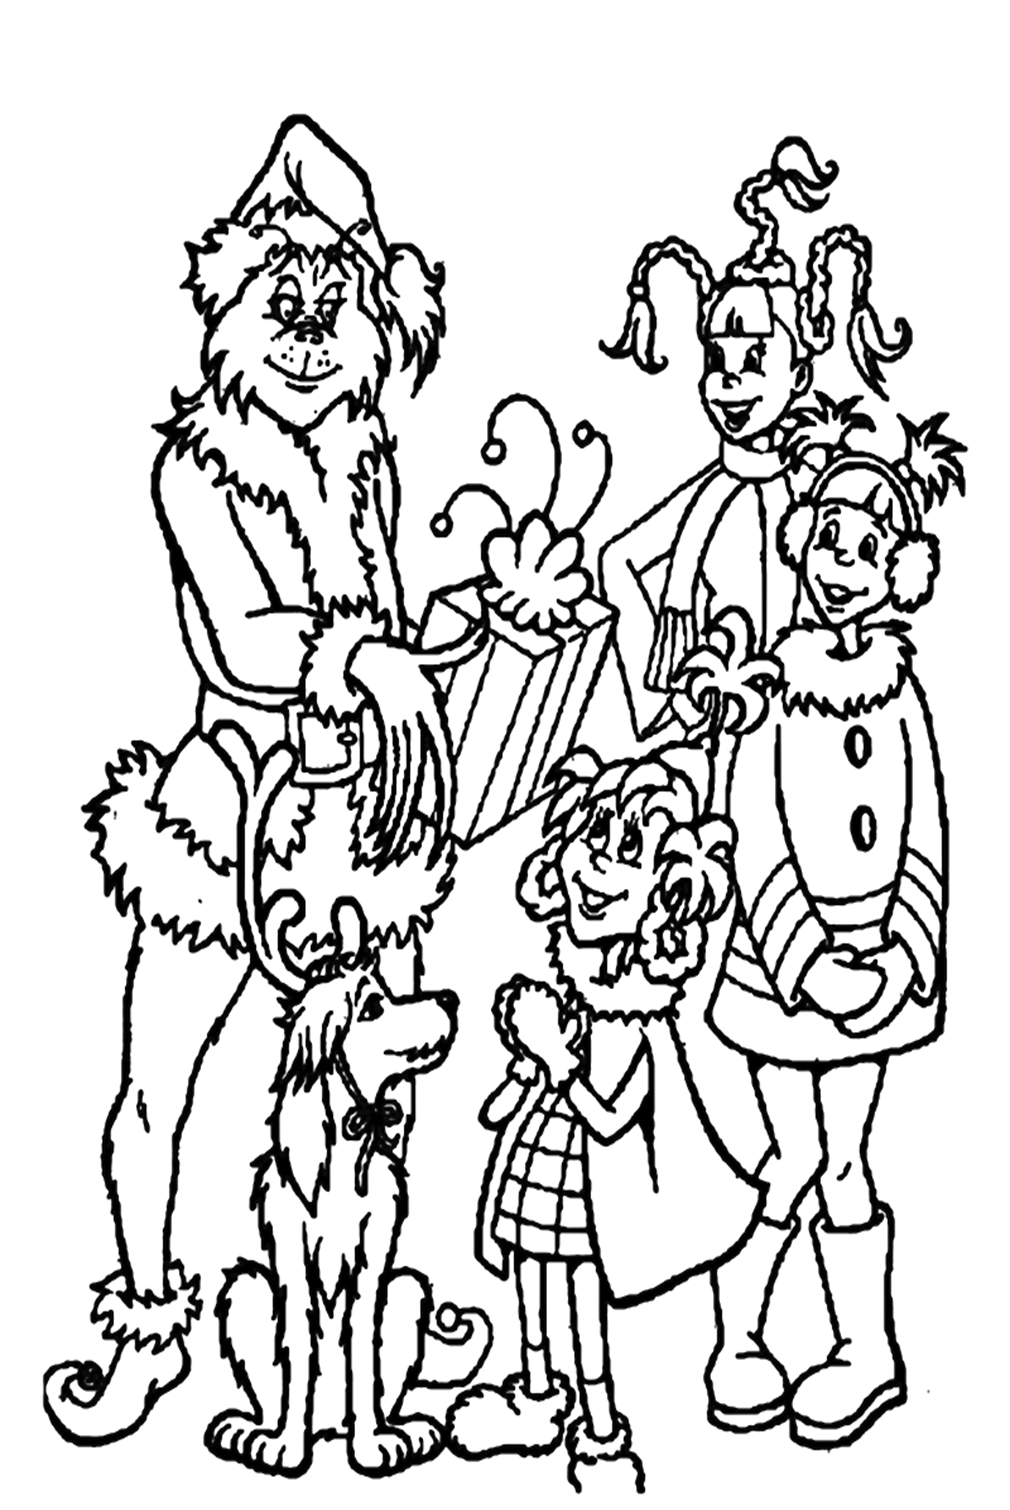 Grinch Gives Children A Christmas Gift Coloring Pages